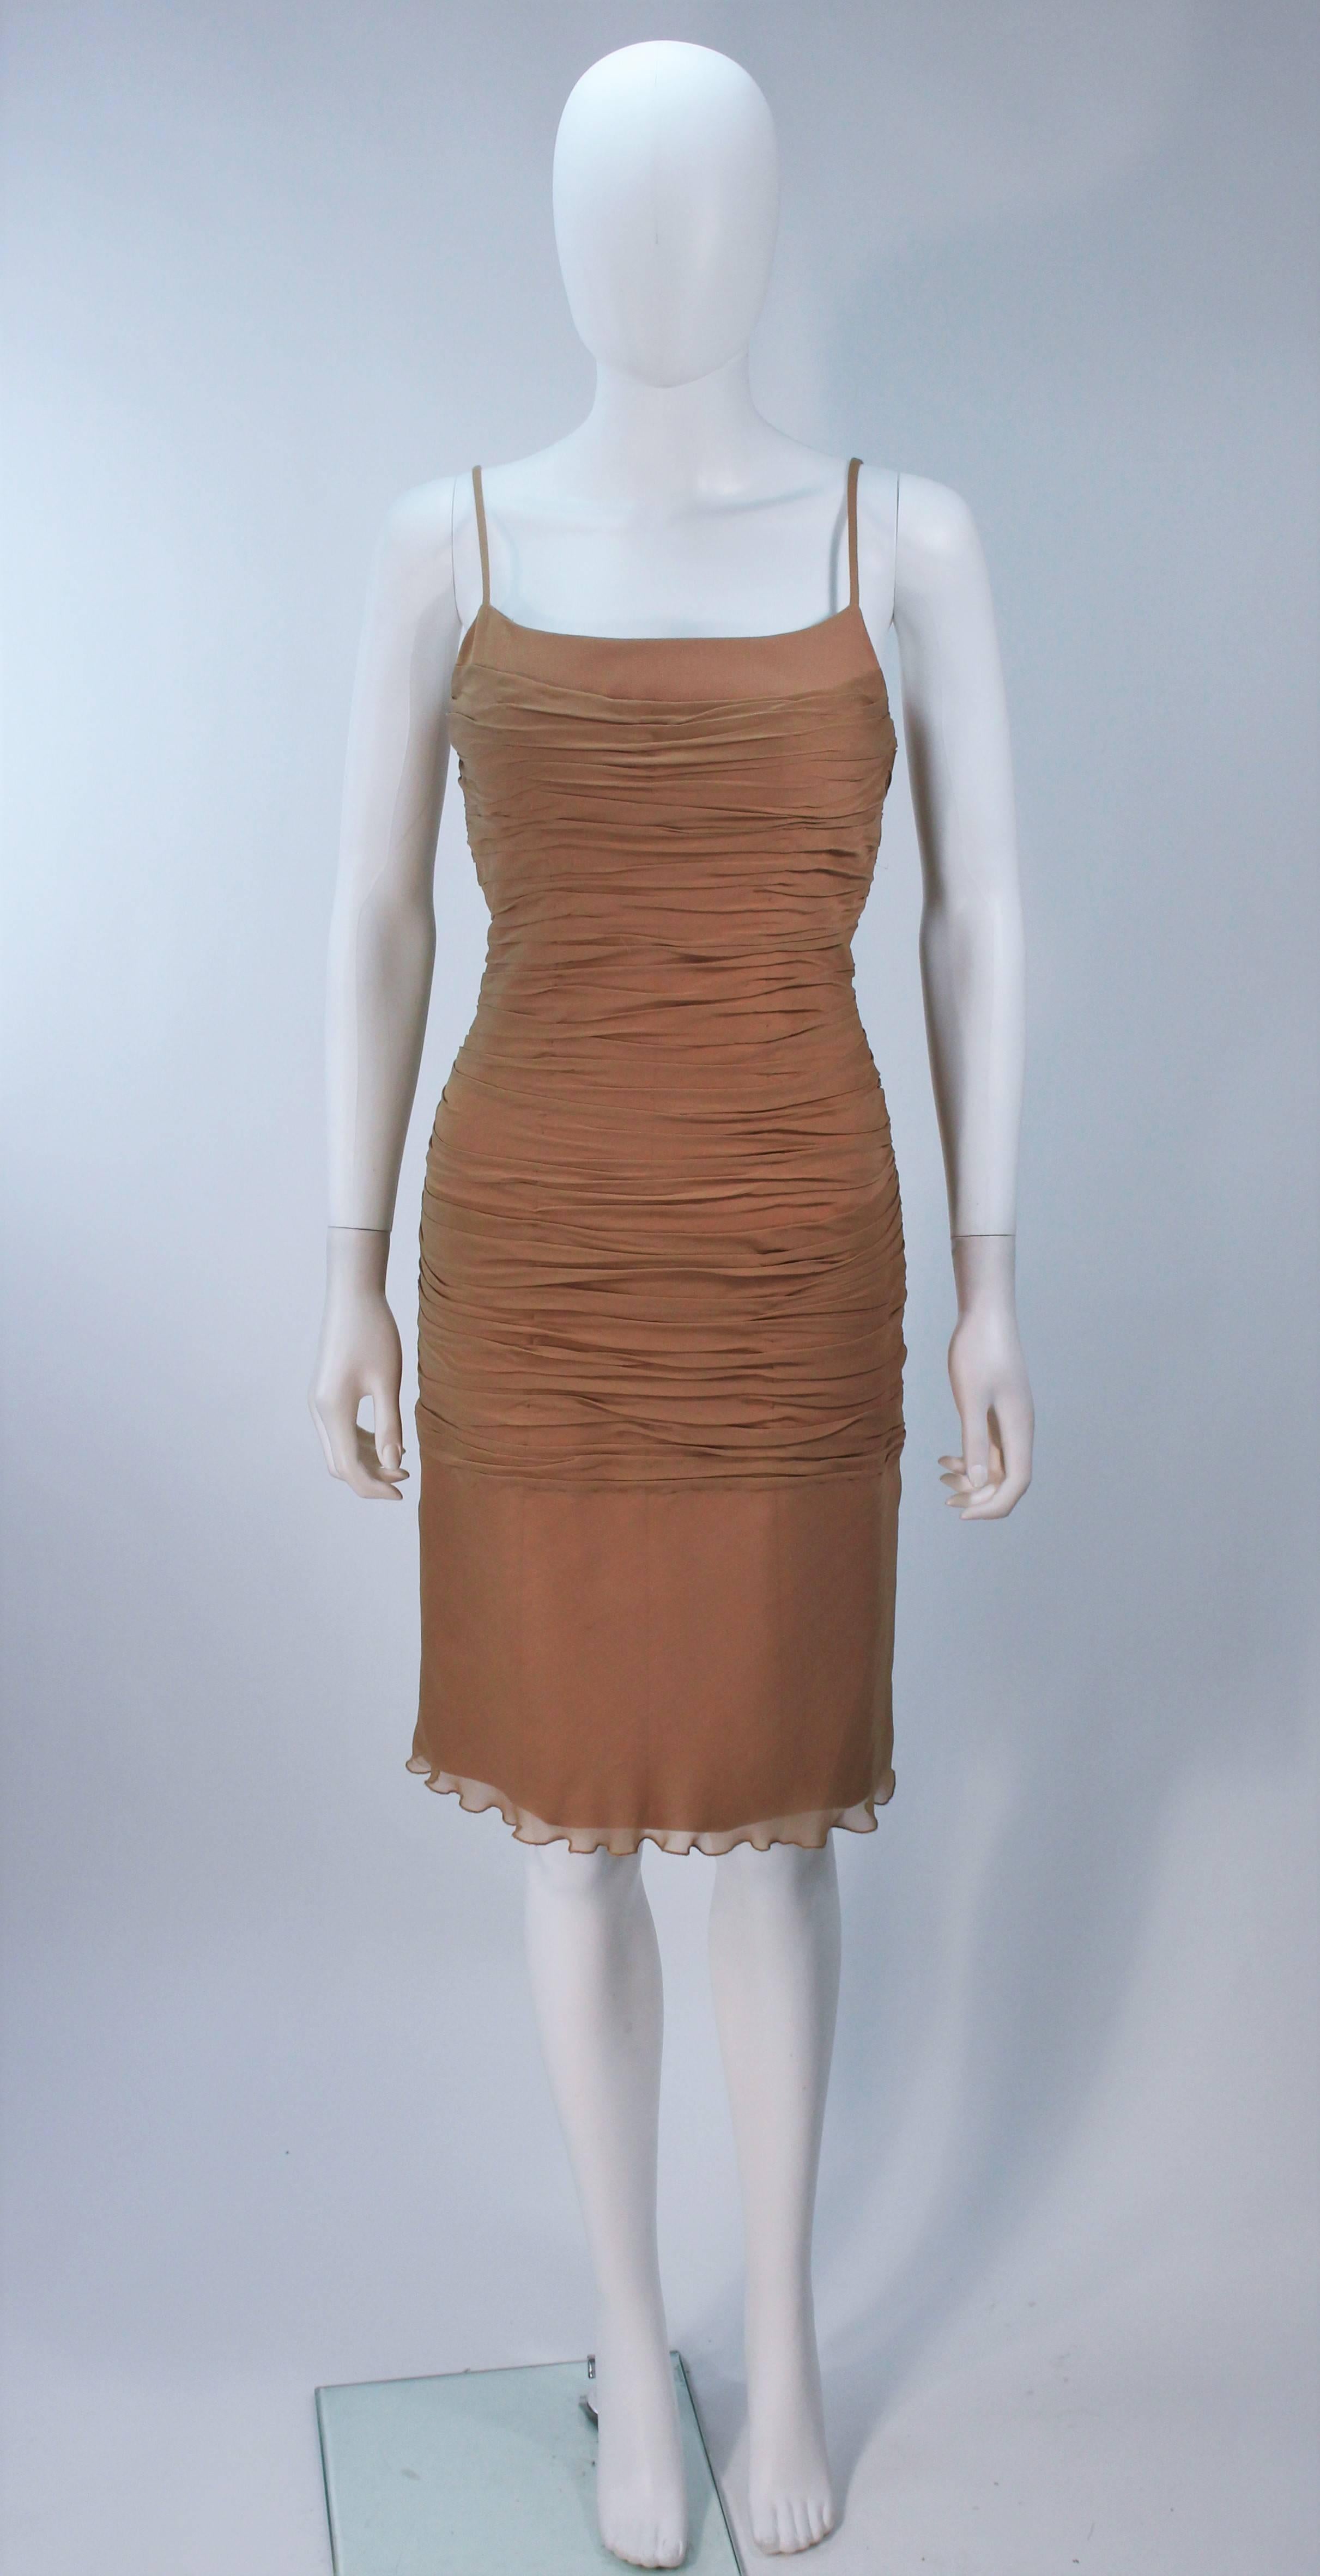  This Galanos  cocktail dress is composed of a nude/camel silk chiffon. Features a ruched design with spaghetti straps, and side zipper closure. In excellent vintage condition. 

  **Please cross-reference measurements for personal accuracy. Size